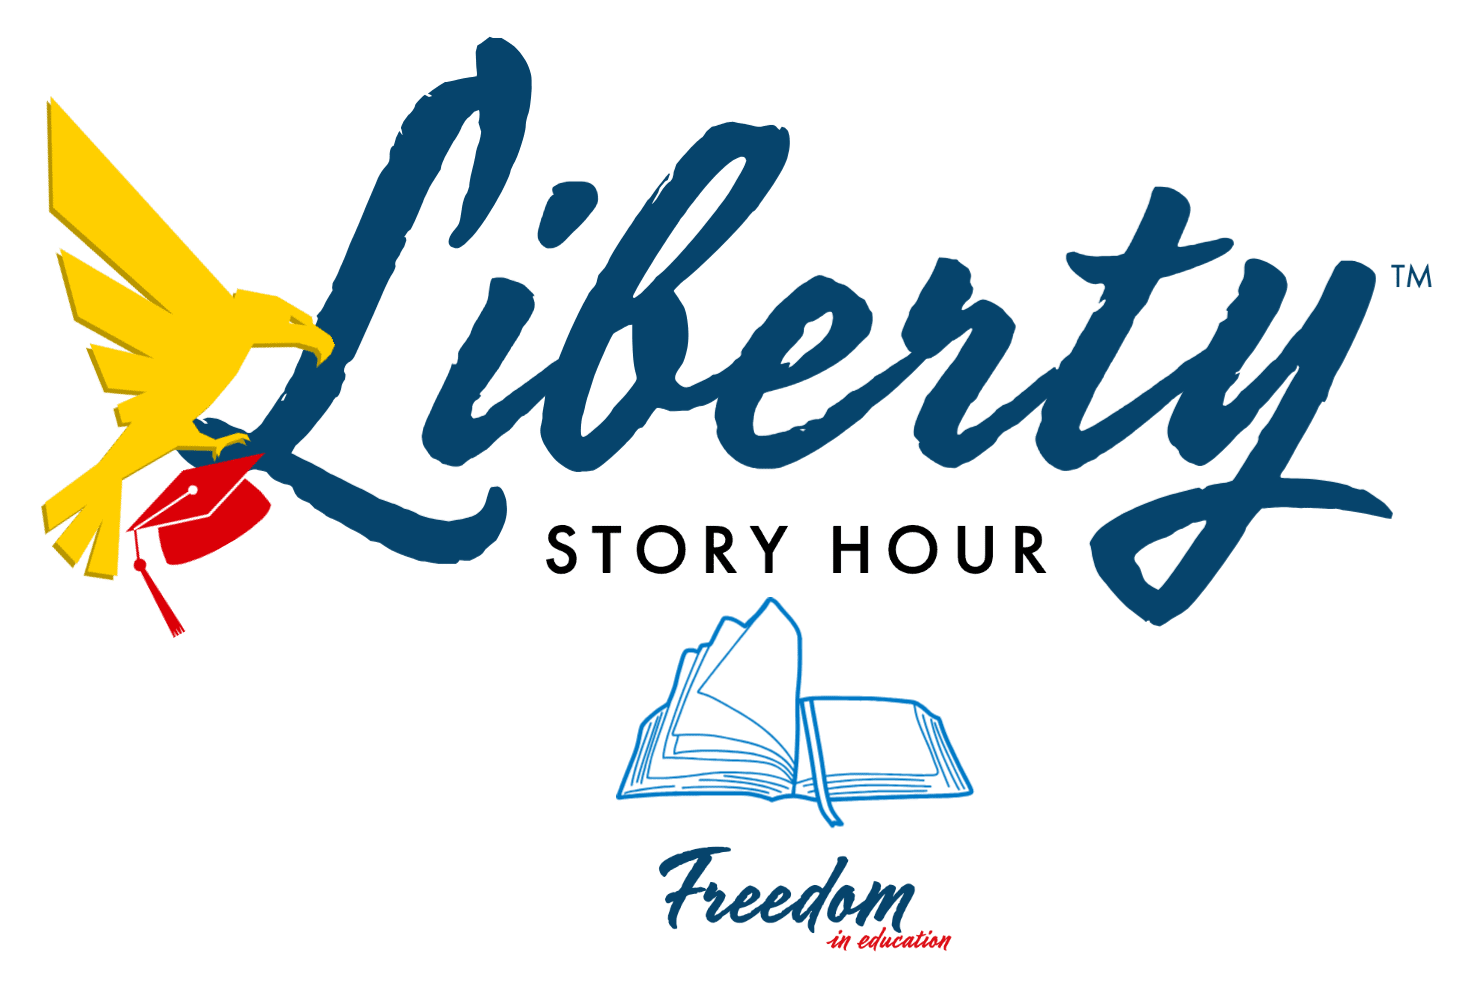 FIE_LOGO-LIBERTY_STORY_HR-cropped